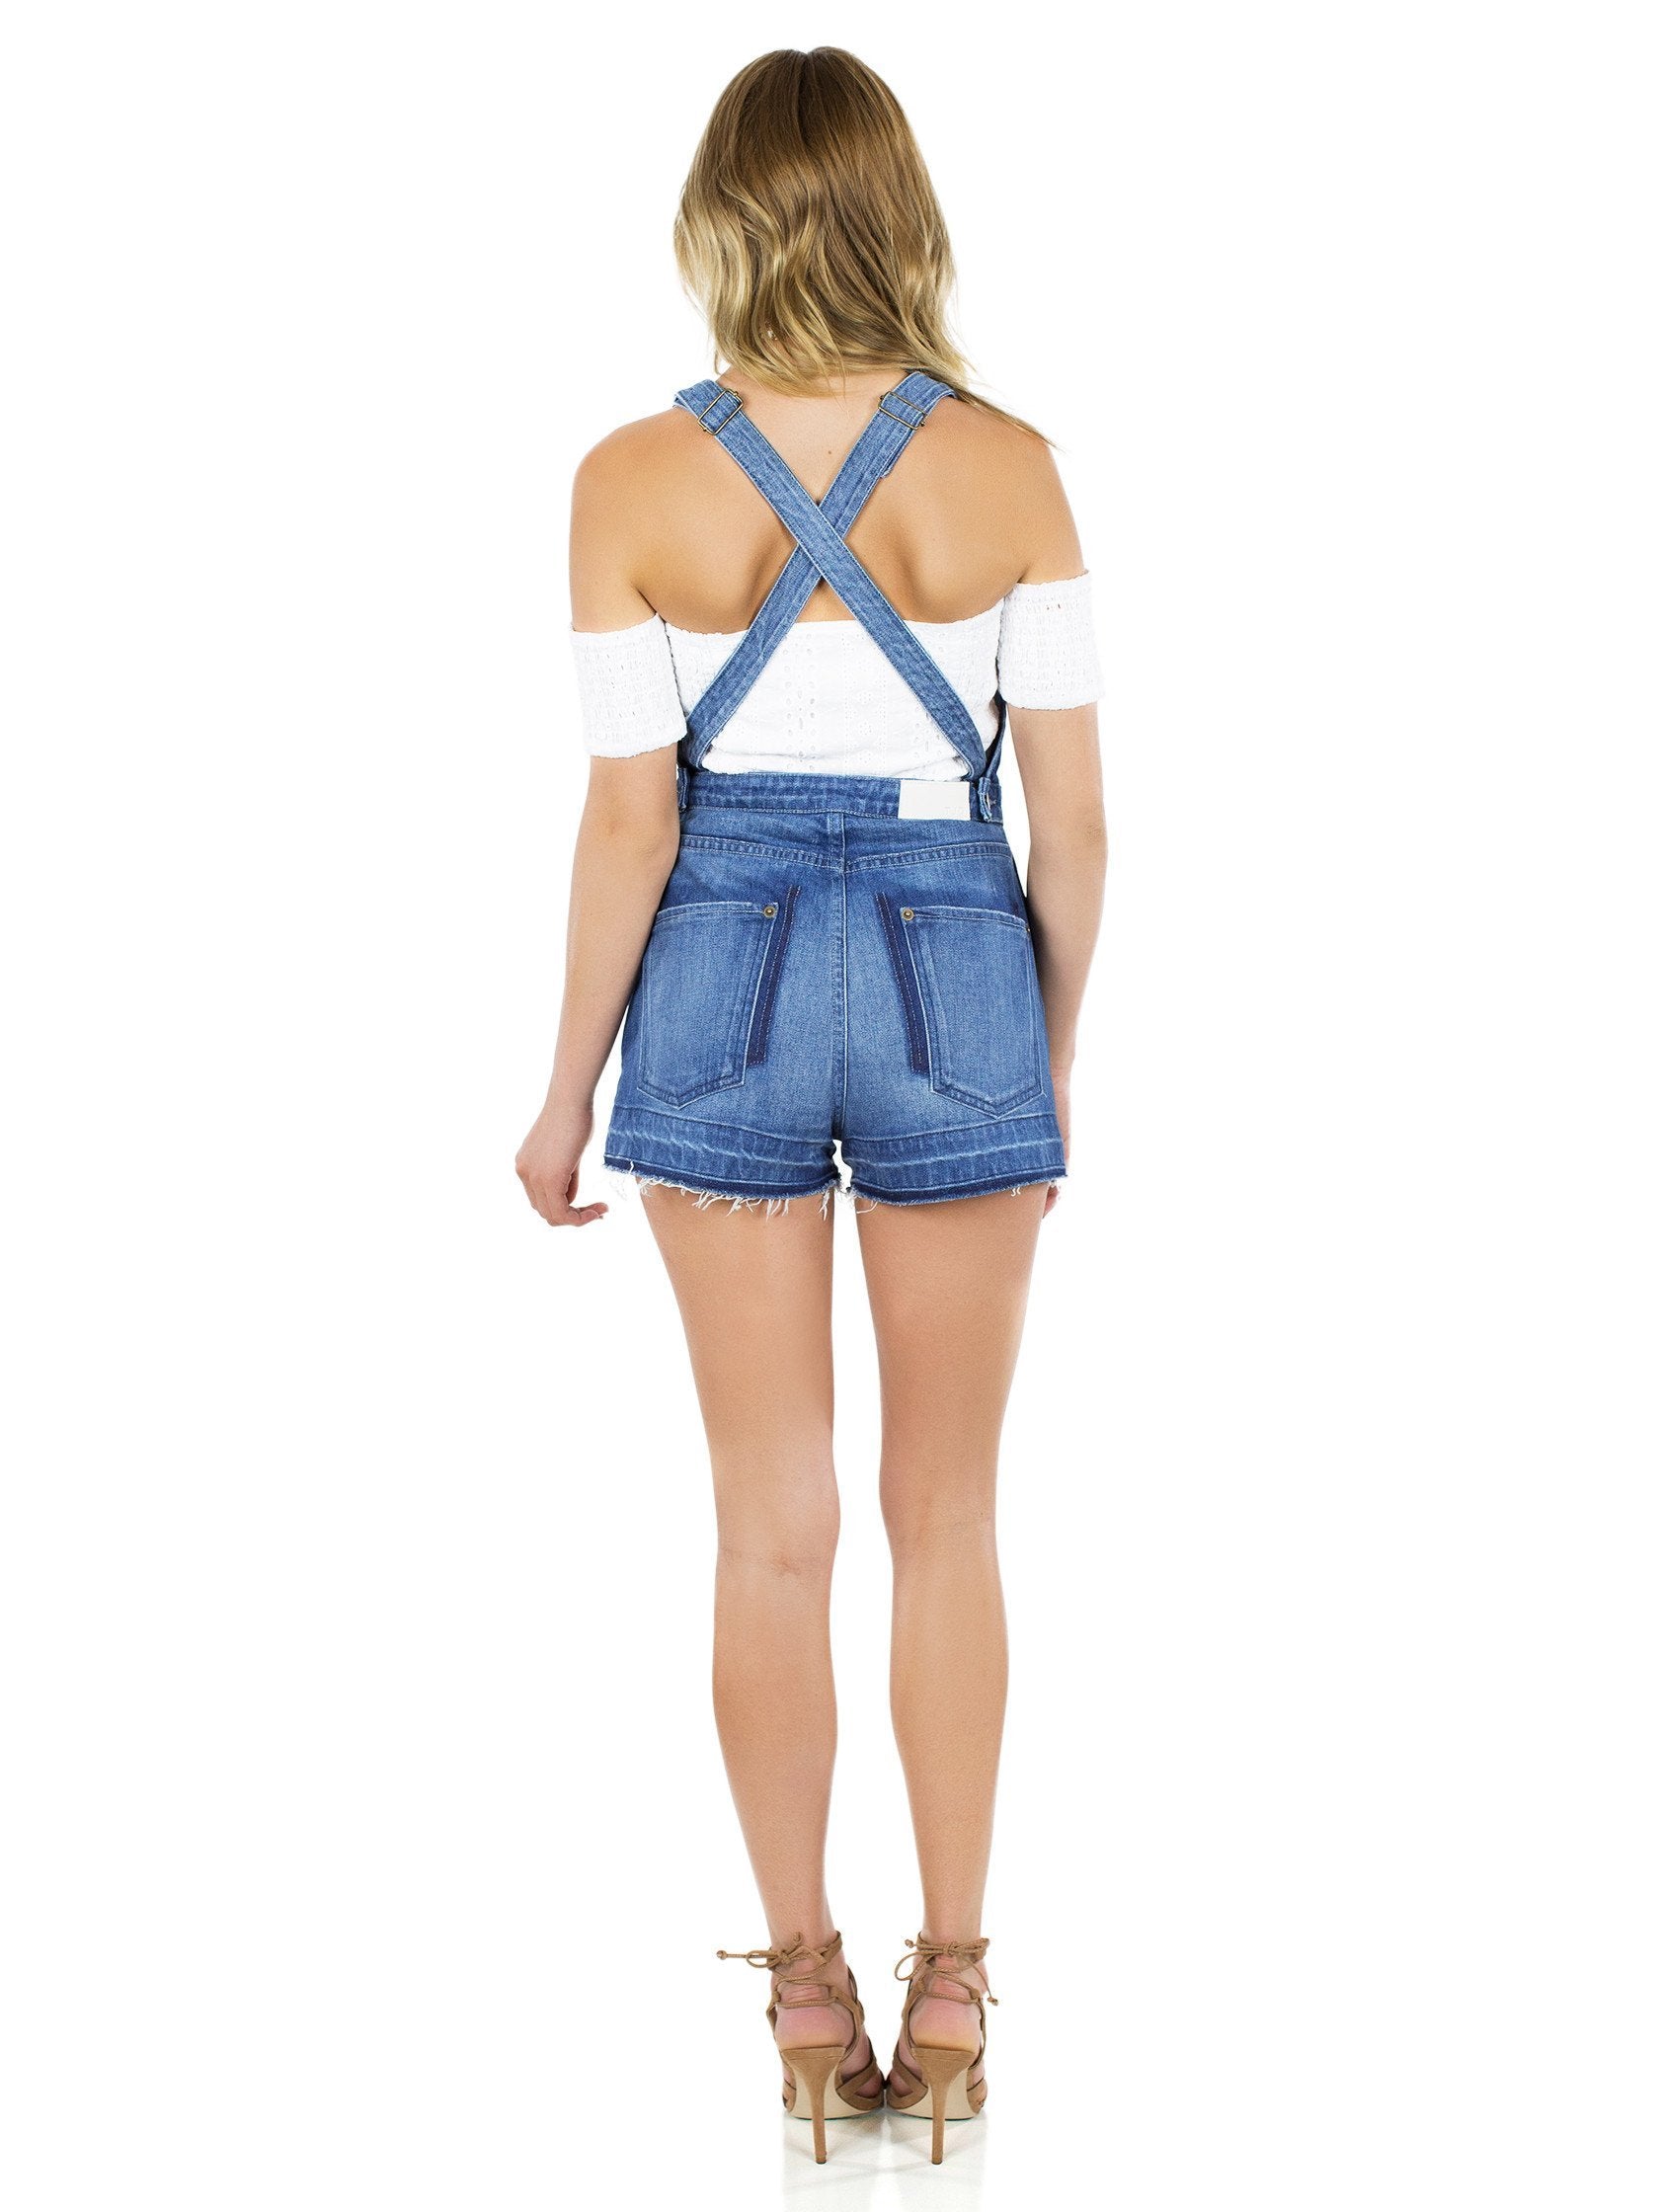 Women wearing a romper rental from The Jetset Diaries called Tash Overall Romper